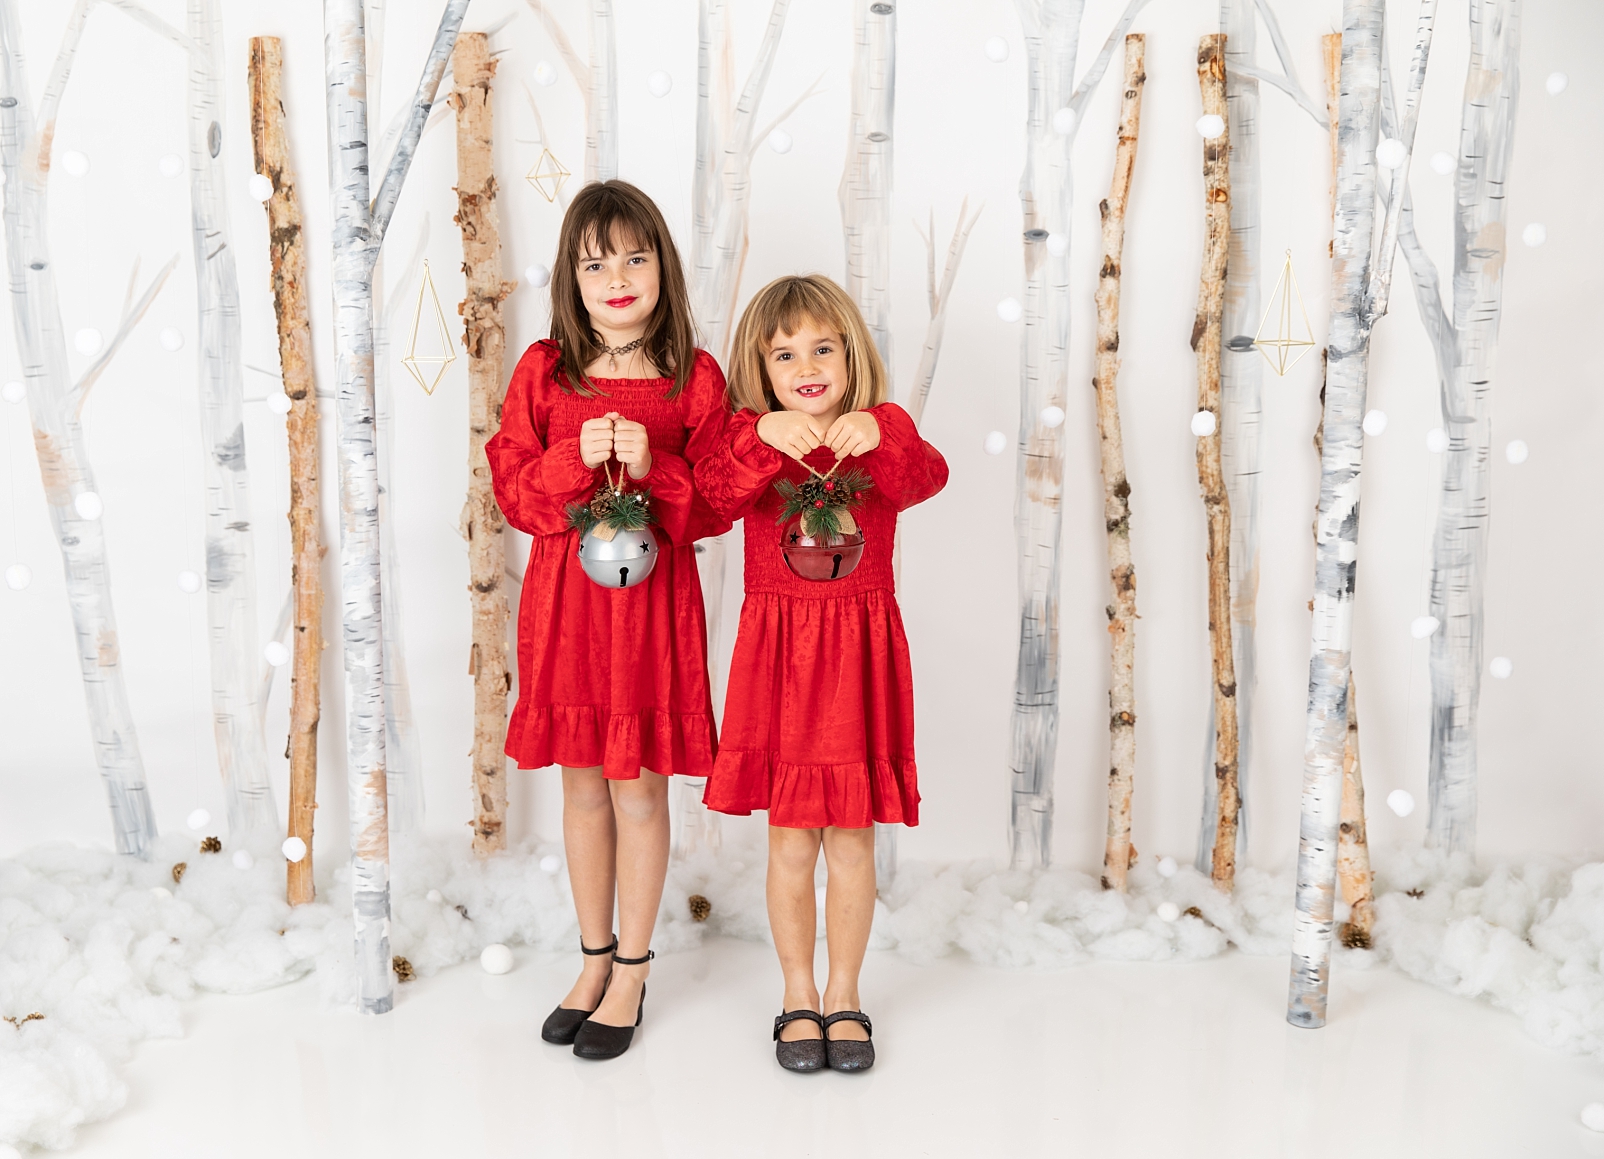 two girls in red dresses holding jingle bells in front of birch tree background
